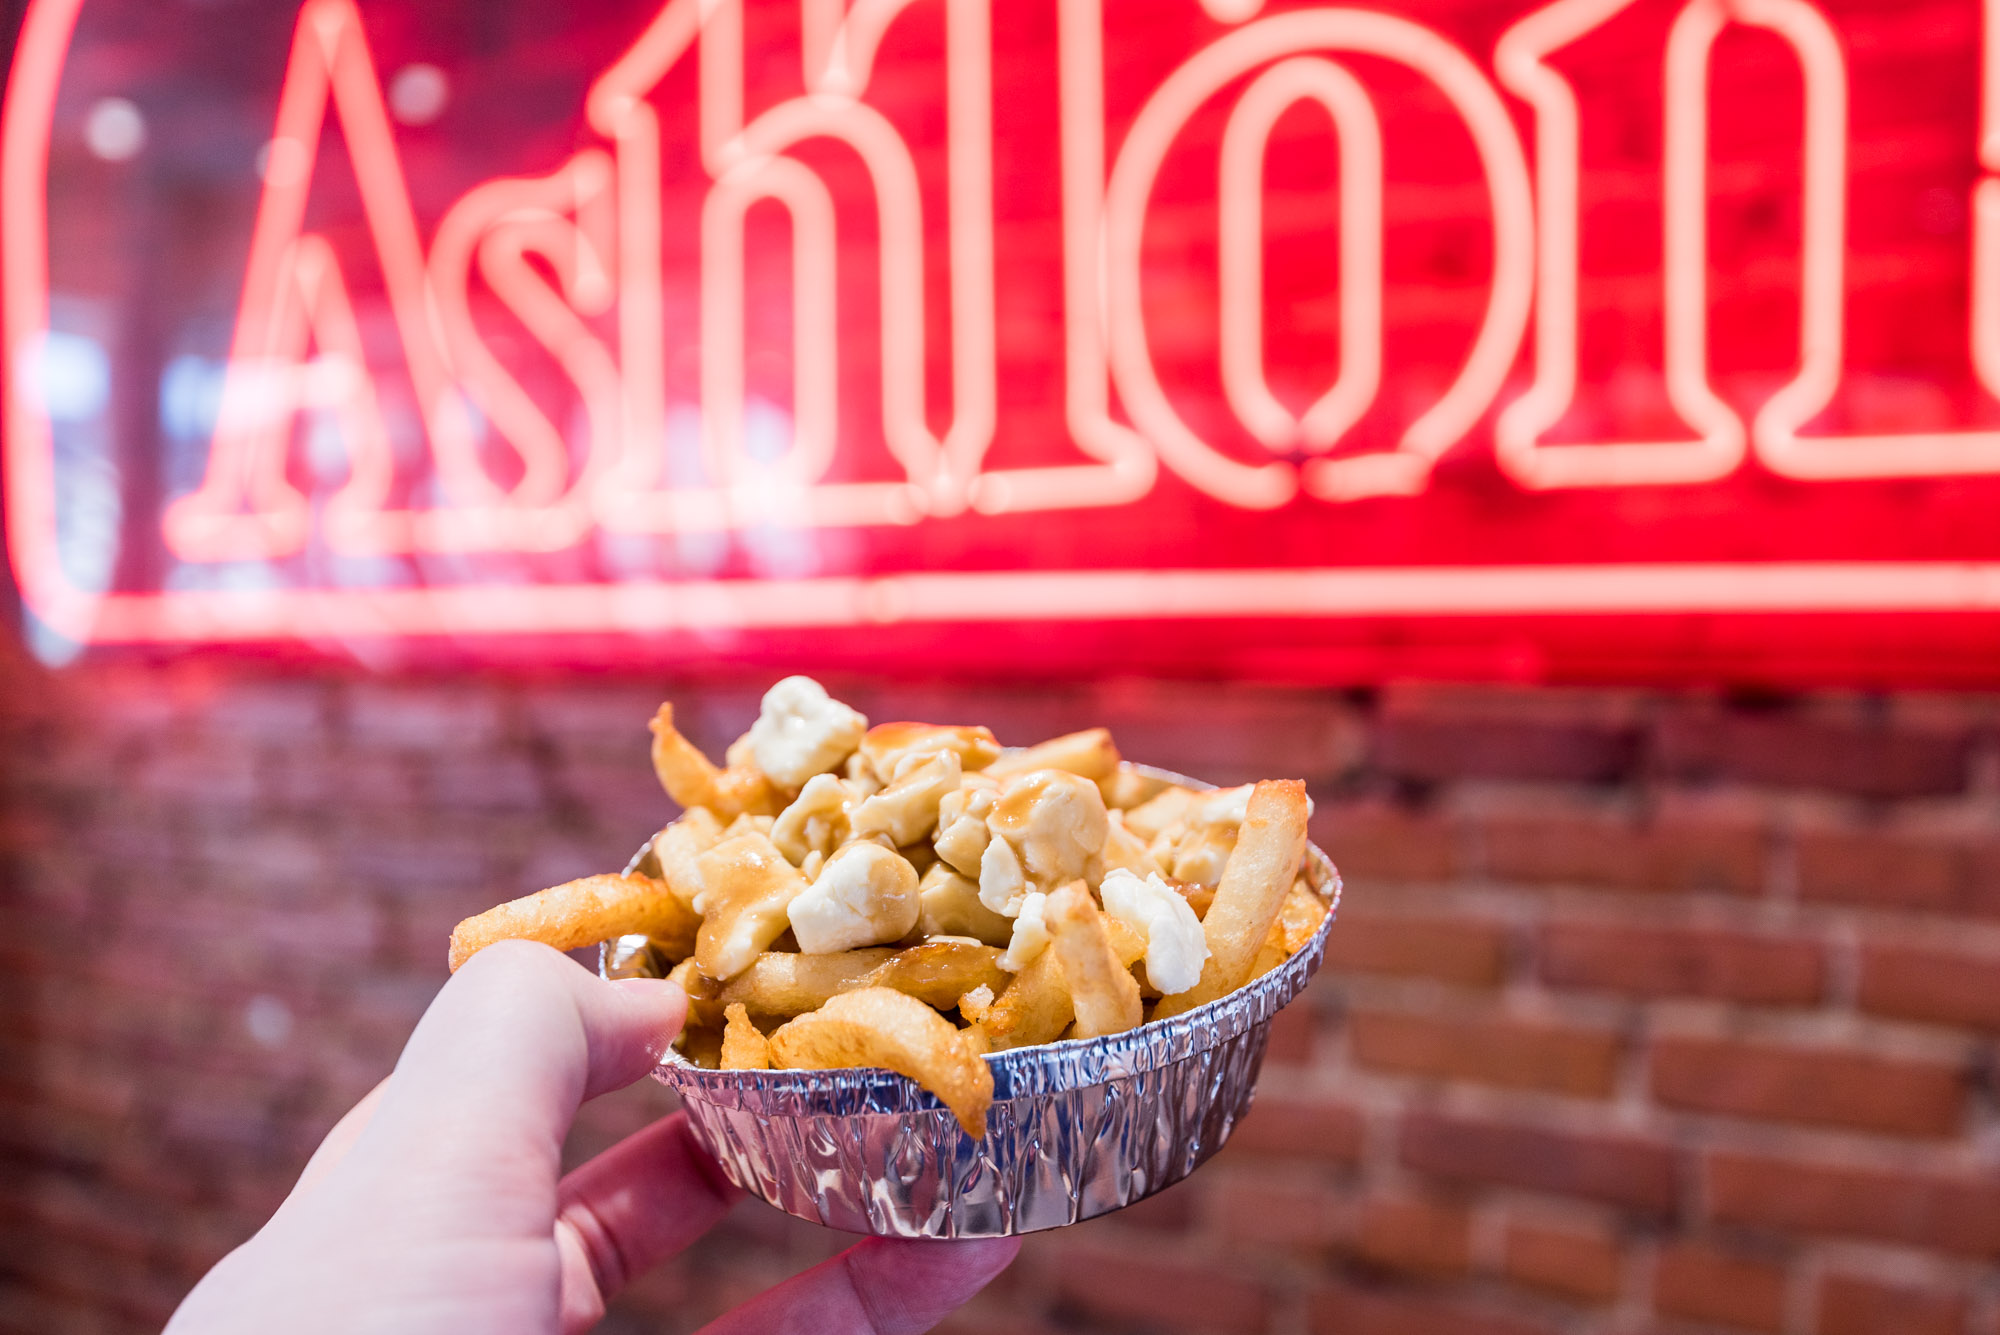 Late night poutine at Ashton - Best things to do in Quebec City to live like a local 